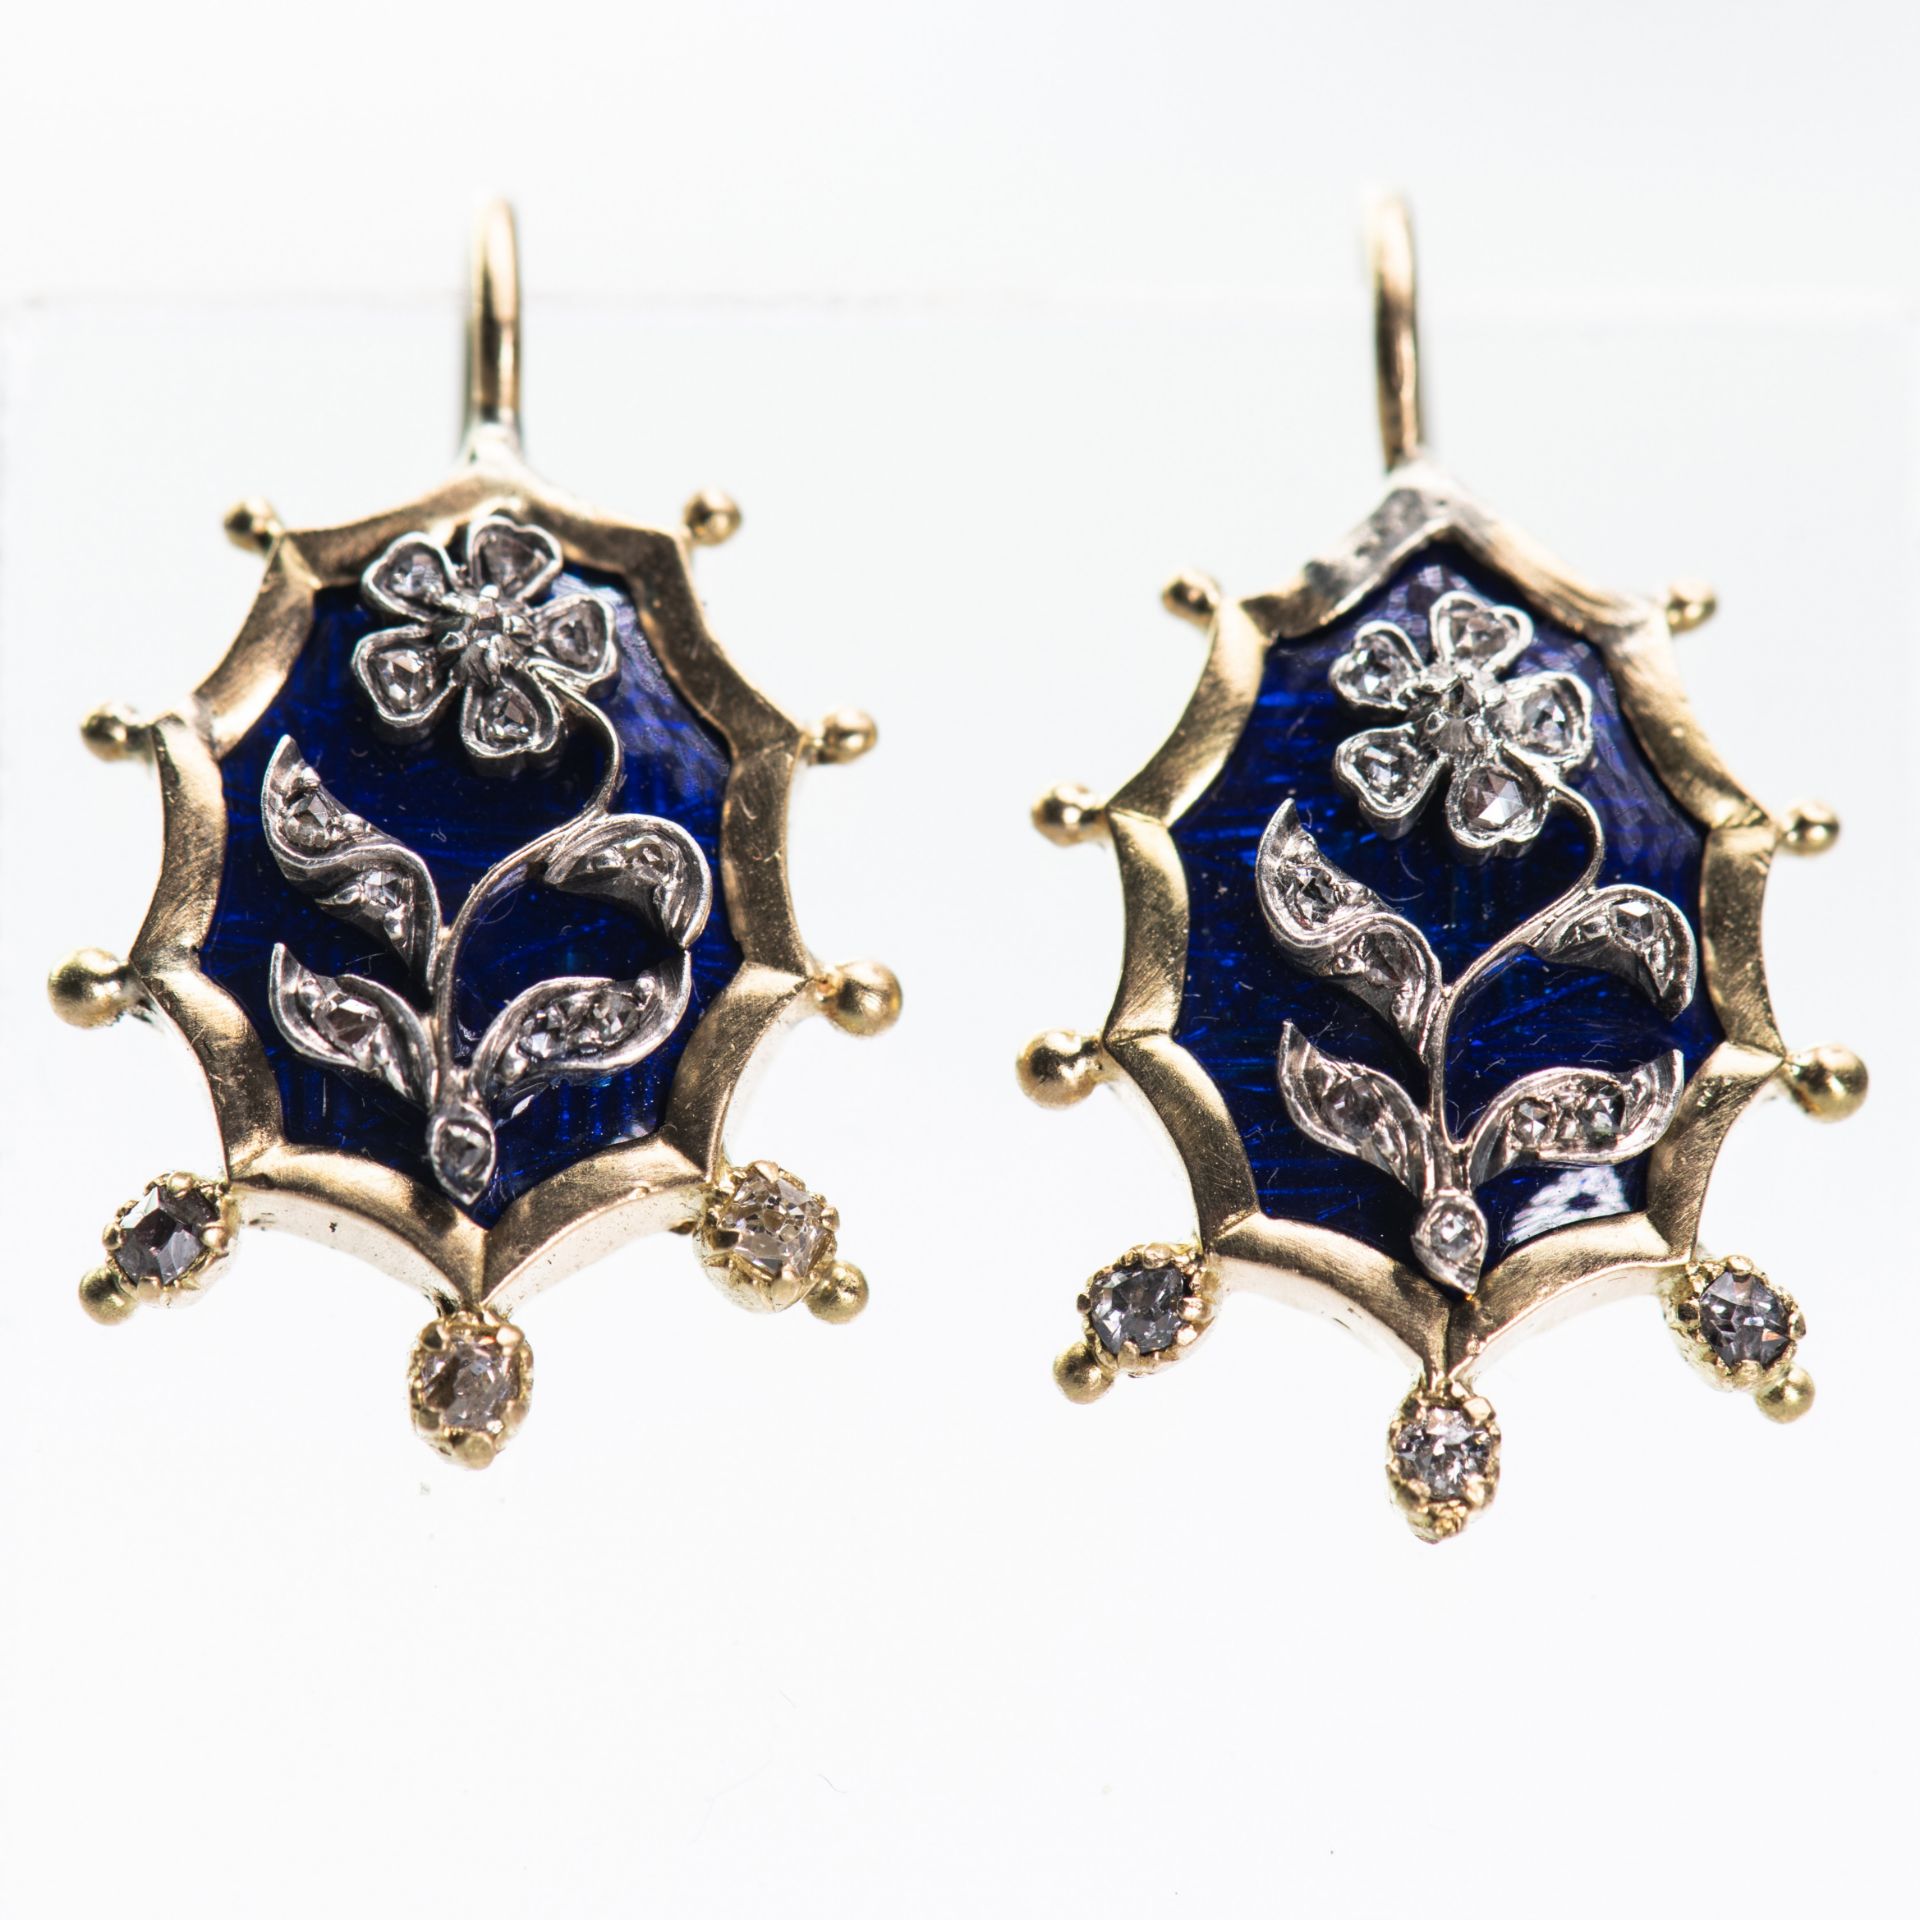 A PAIR OF LATE 19TH CENTURY DIAMOND AND ENAMEL EARRINGS